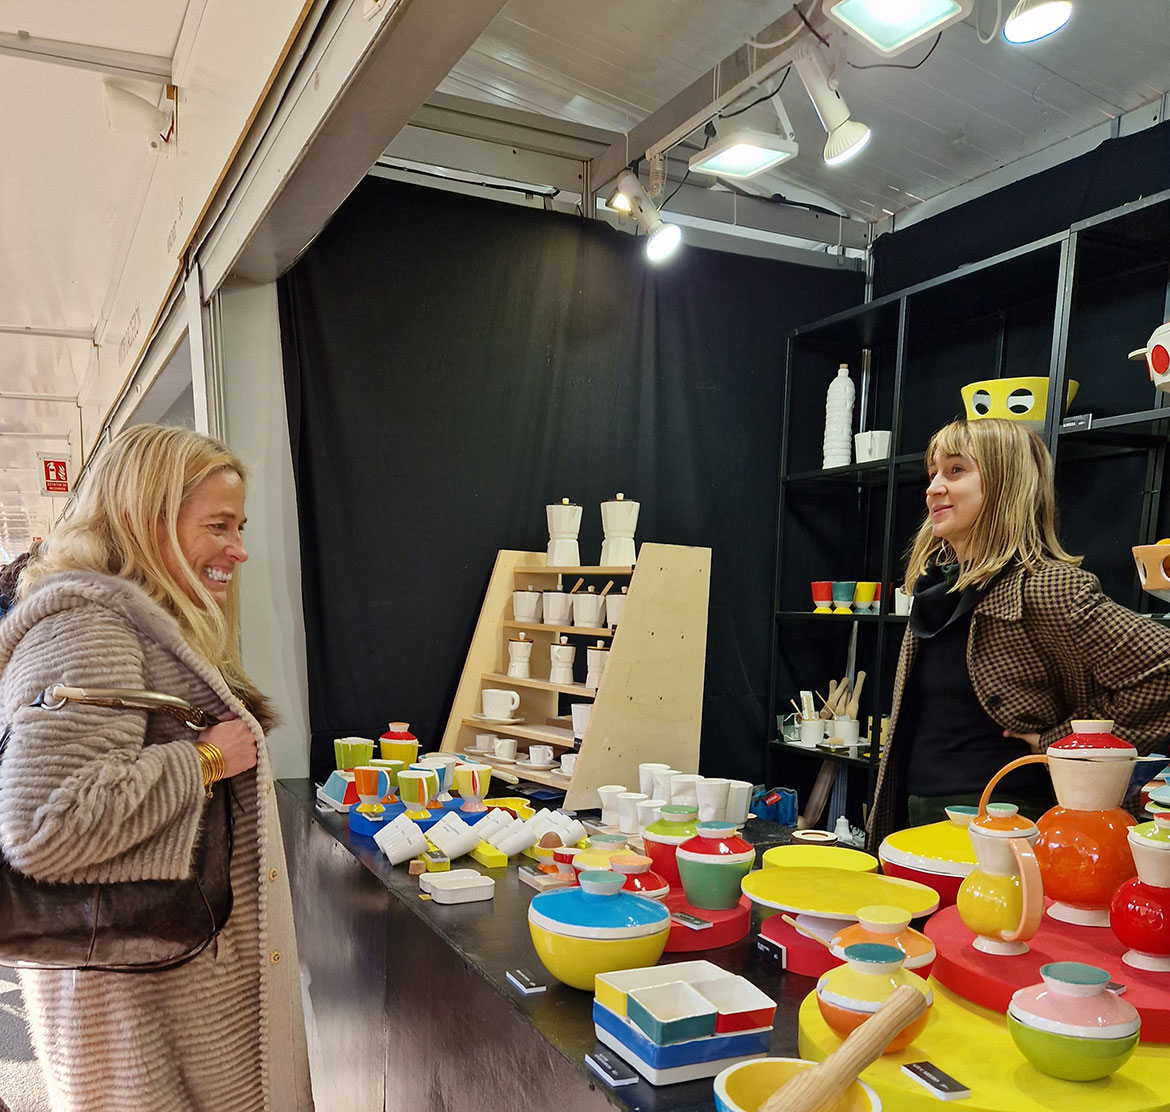 Woman in front of a craft stall attended by a saleswoman